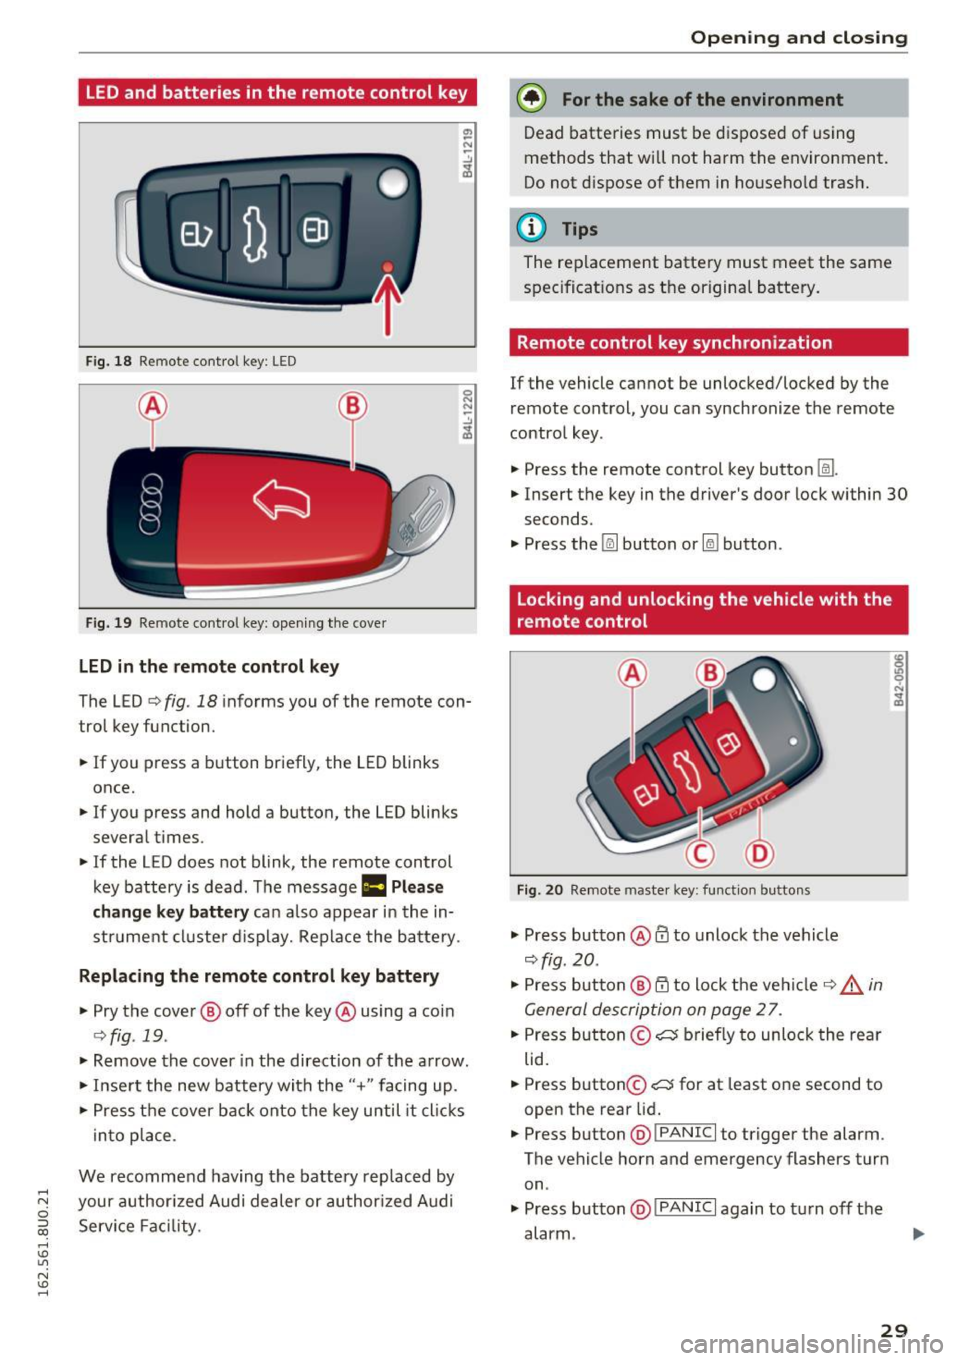 AUDI Q3 2016  Owners Manual .... N 
c:i ::J CX) 
.... I.Cl U"I 
N I.Cl ...... 
LED and  batteries  in the  remote  control  key 
Fig.  18 Re mote  contro l key : LE D 
Fig. 19 Remote  con trol key : open ing  the  cover 
LED  in